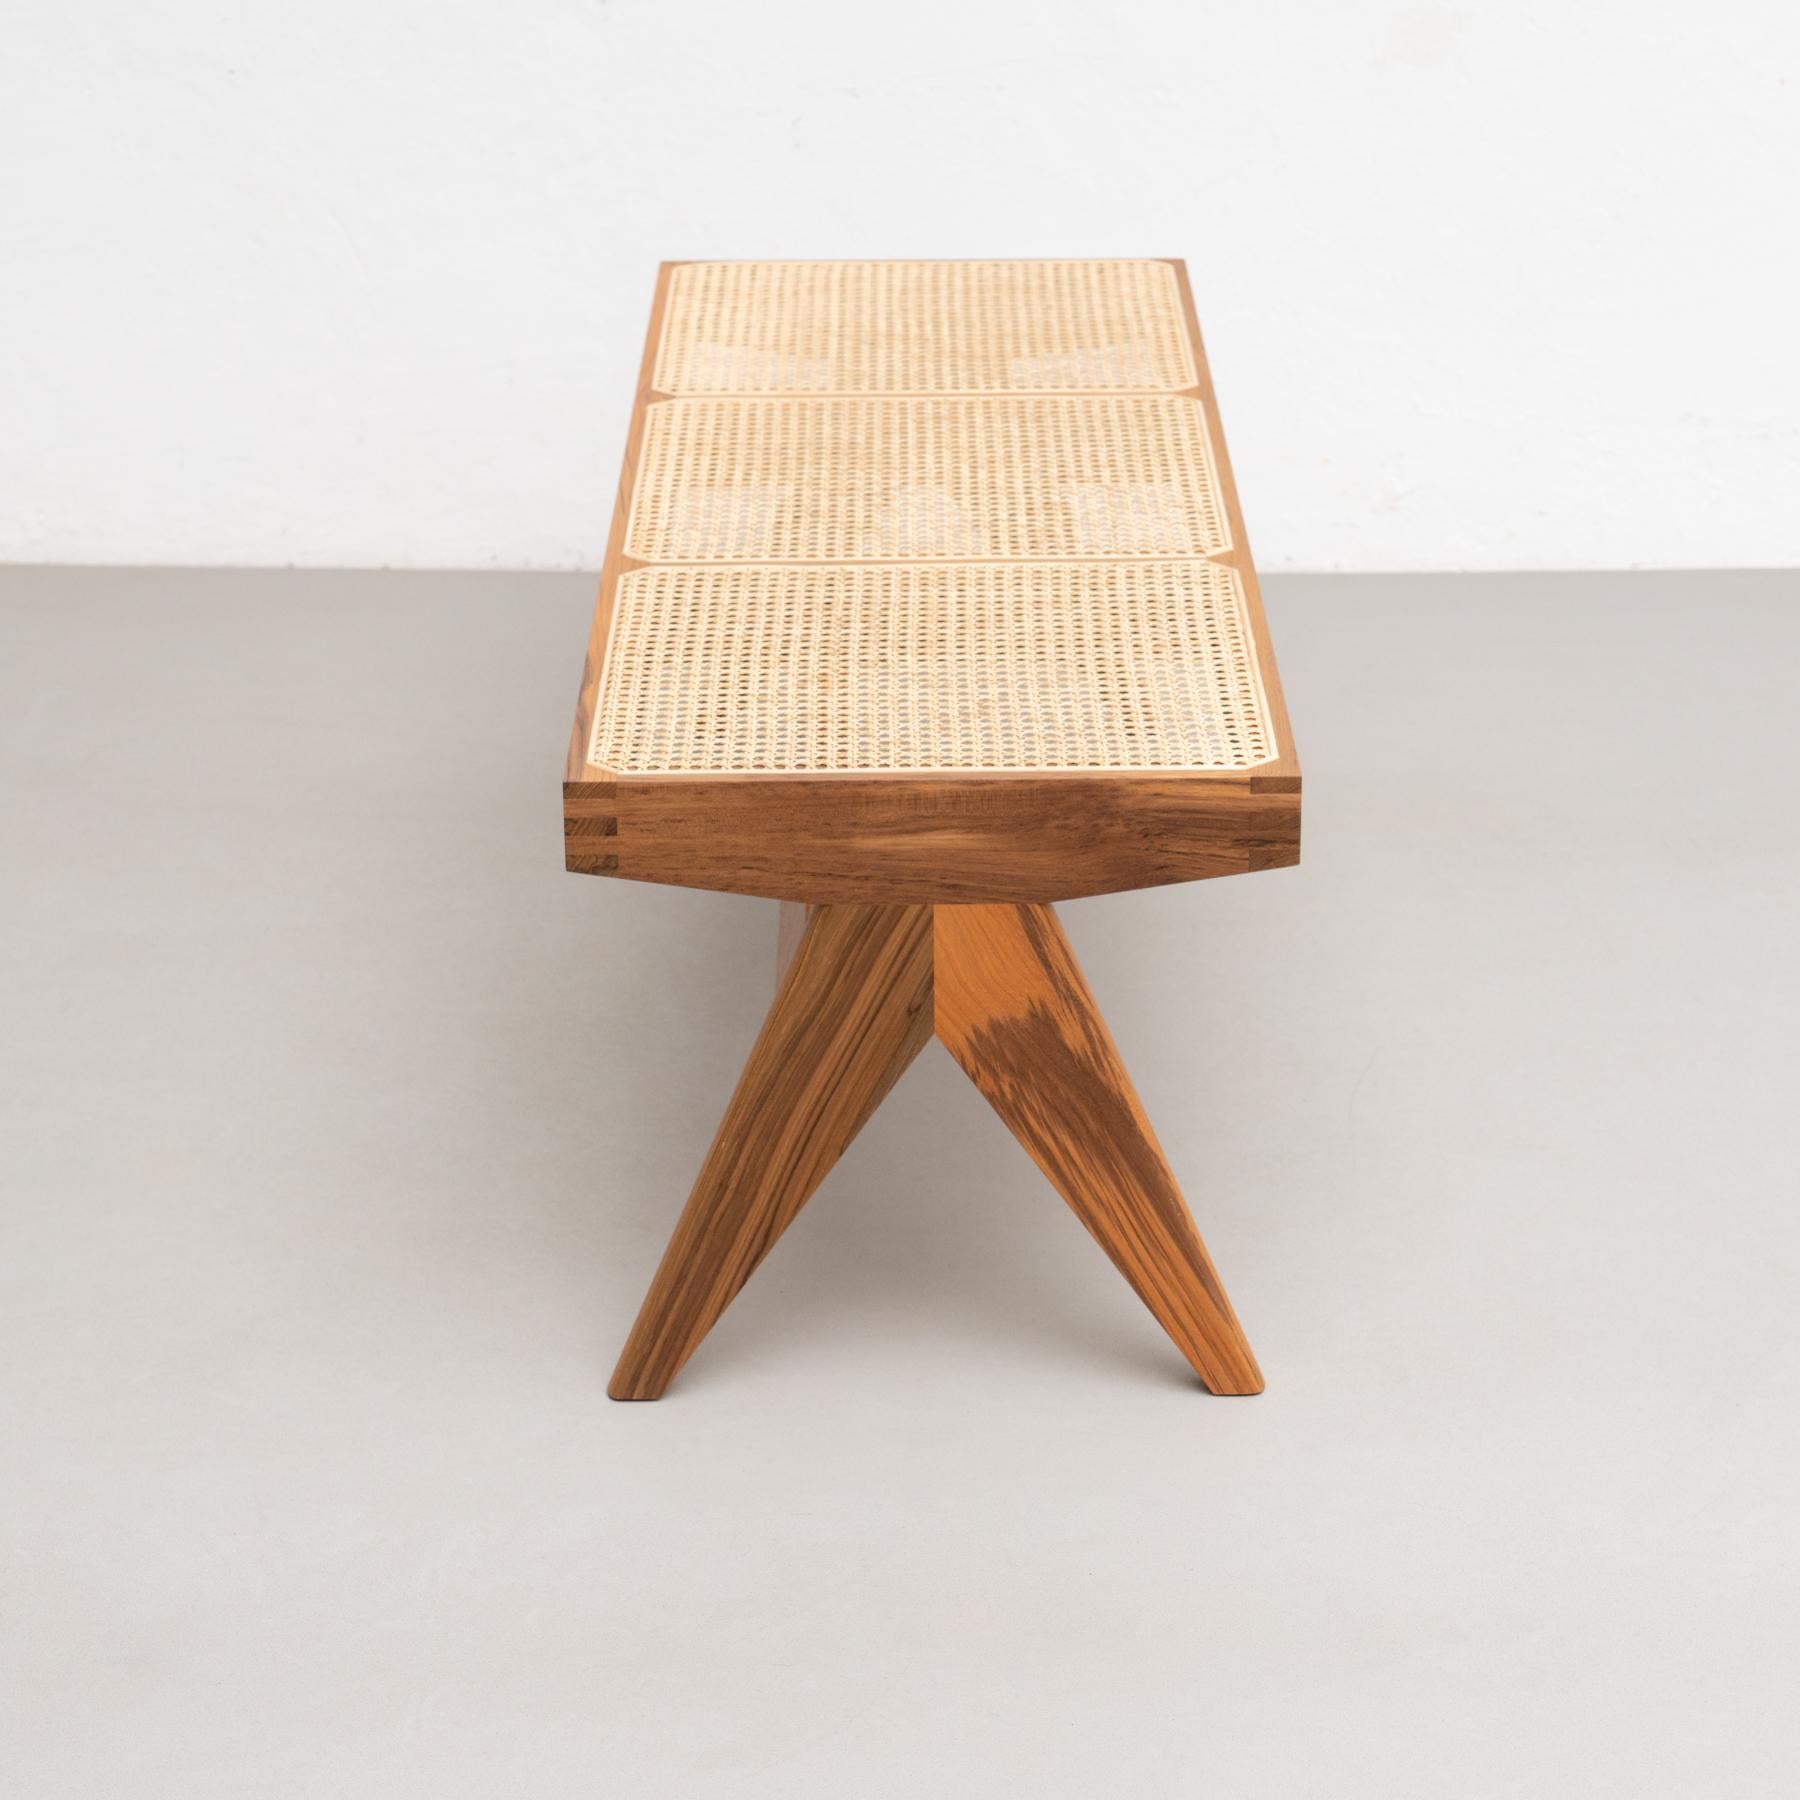 Pierre Jeanneret 057 Civil Bench, Wood and Woven Viennese Cane For Sale 9